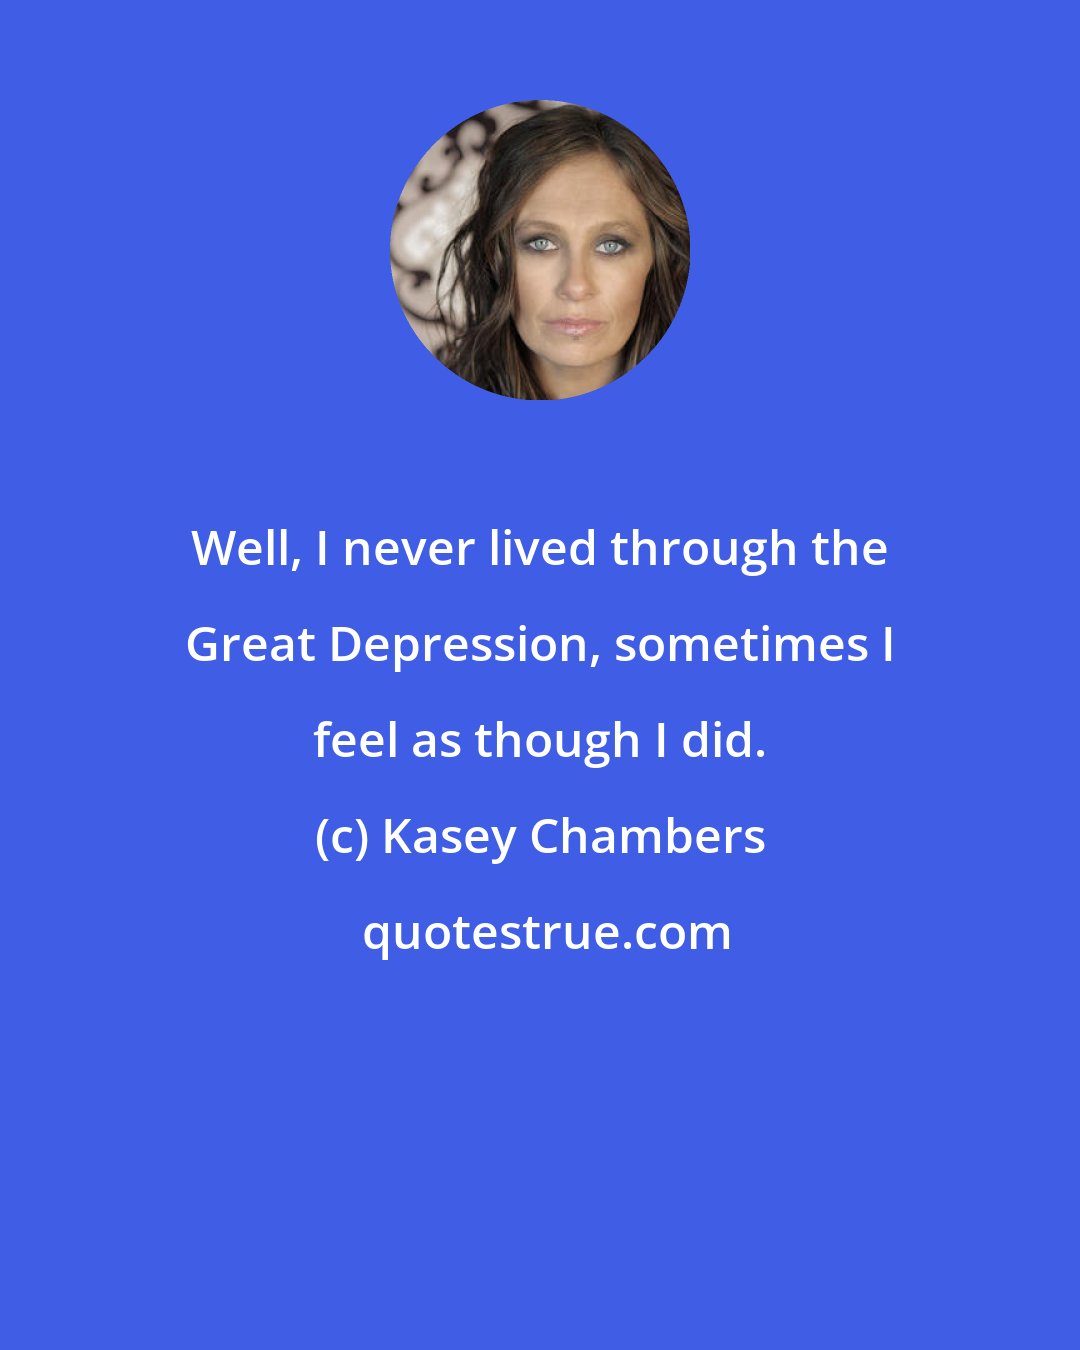 Kasey Chambers: Well, I never lived through the Great Depression, sometimes I feel as though I did.